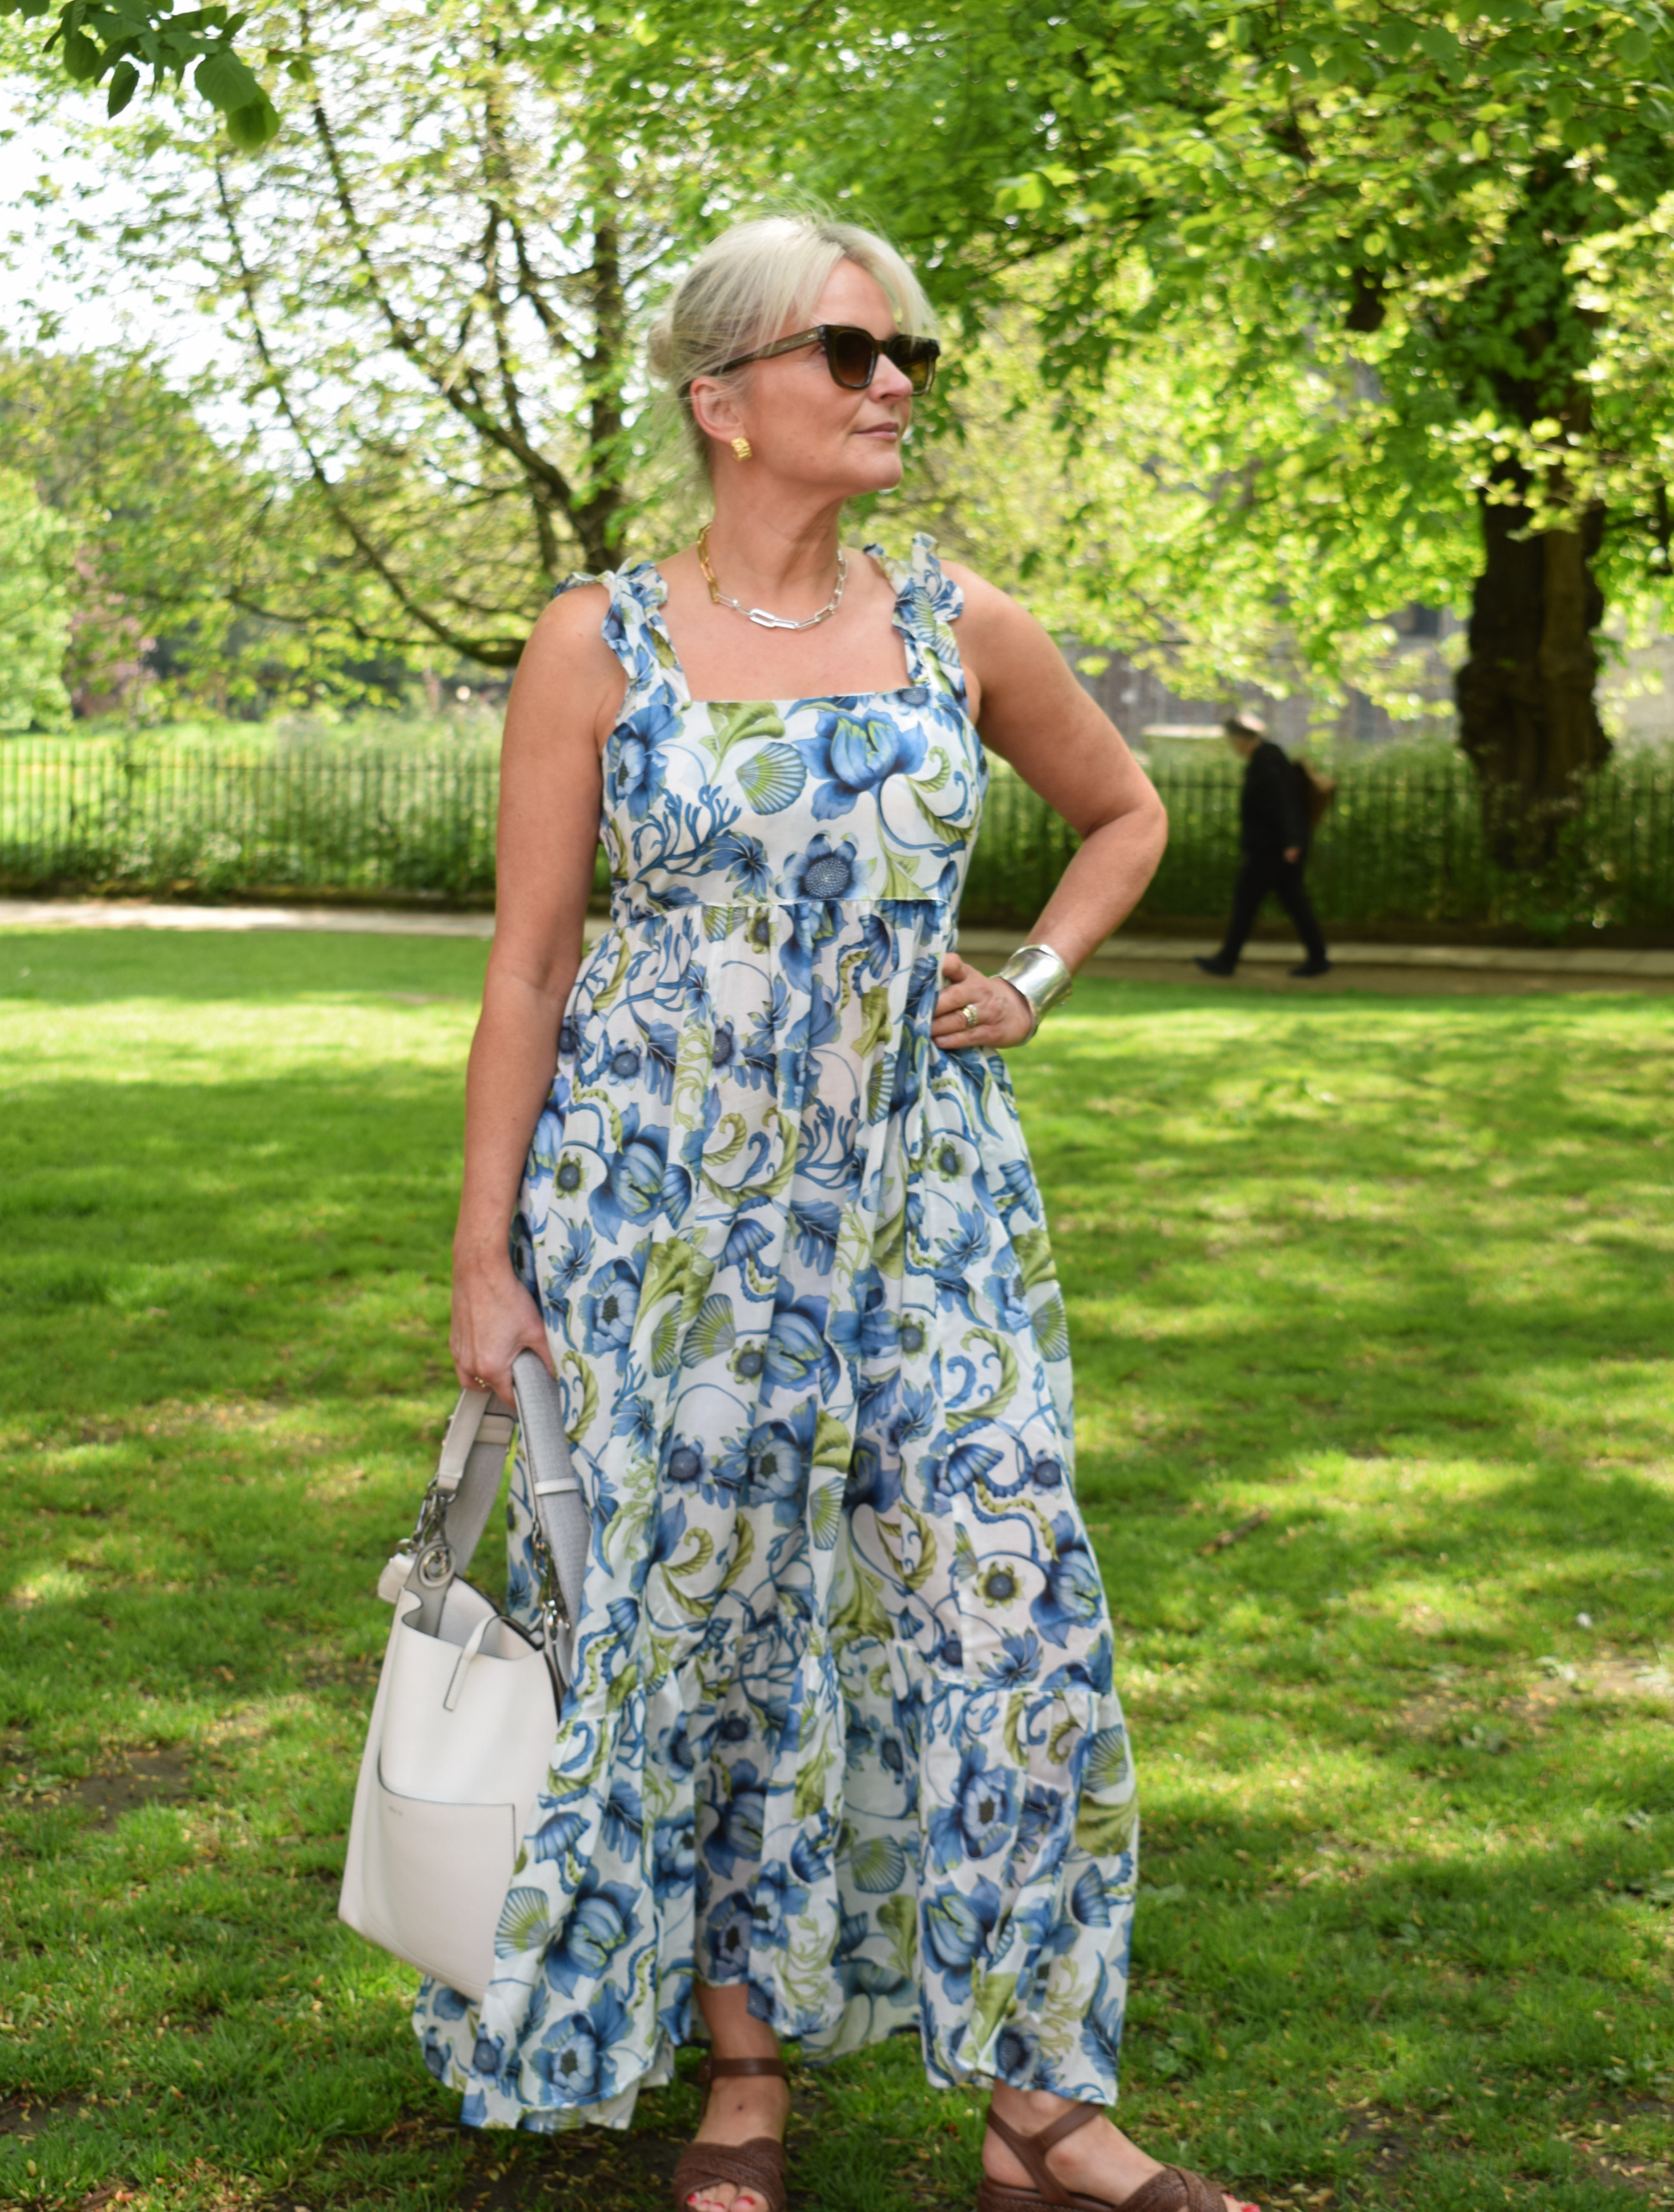 maxi floral dress with ecru base and blue and green pattern with ruffle straps tie back and deep frill